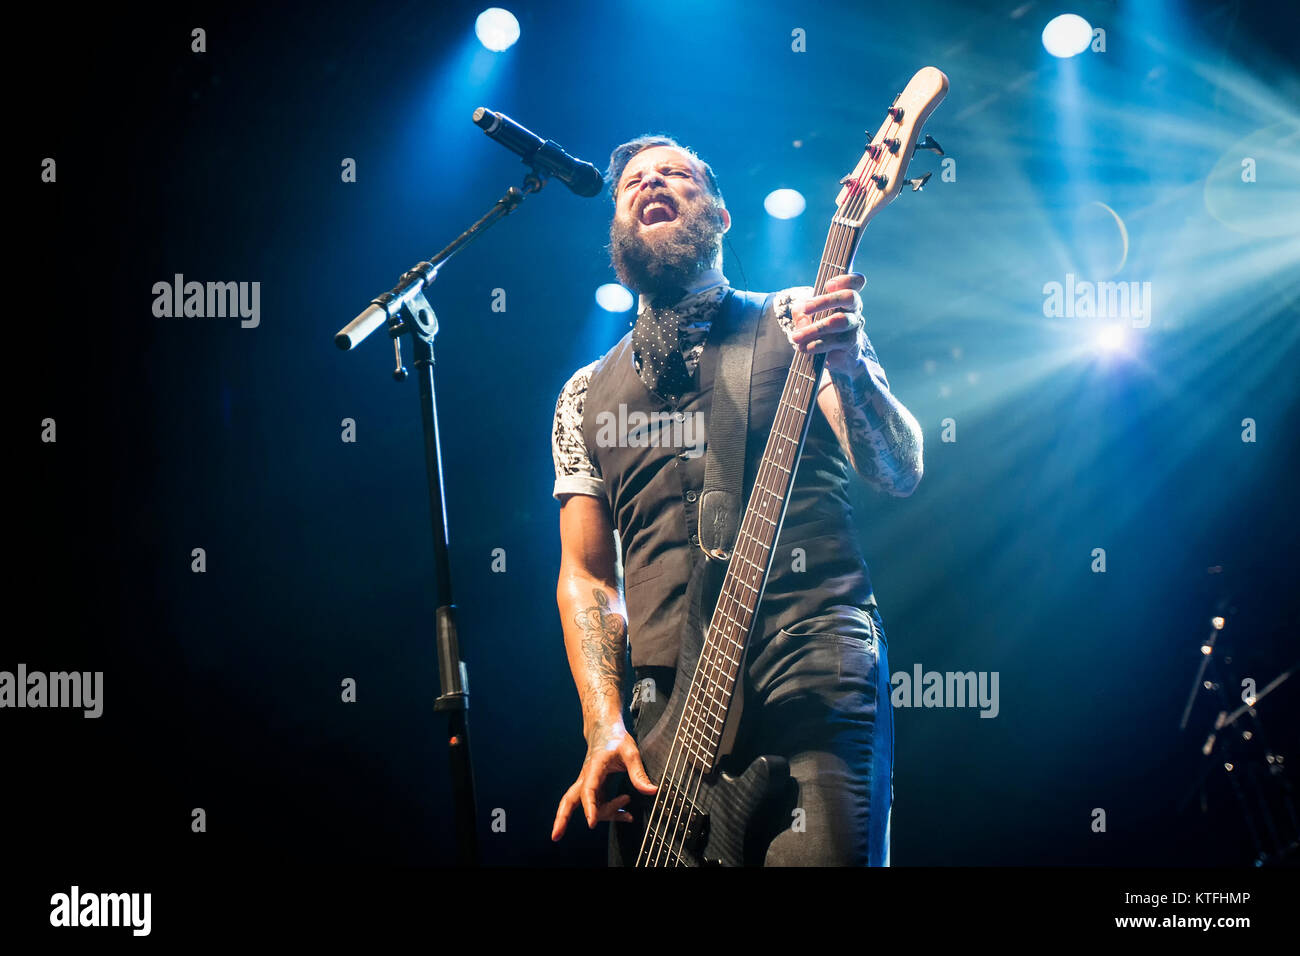 The American Christian rock band Skillet performs a live concert at Sentrum Scene in Oslo. Here bass player and vocalist John Cooper is seen live on stage. Norway, 01/06 2016. Stock Photo